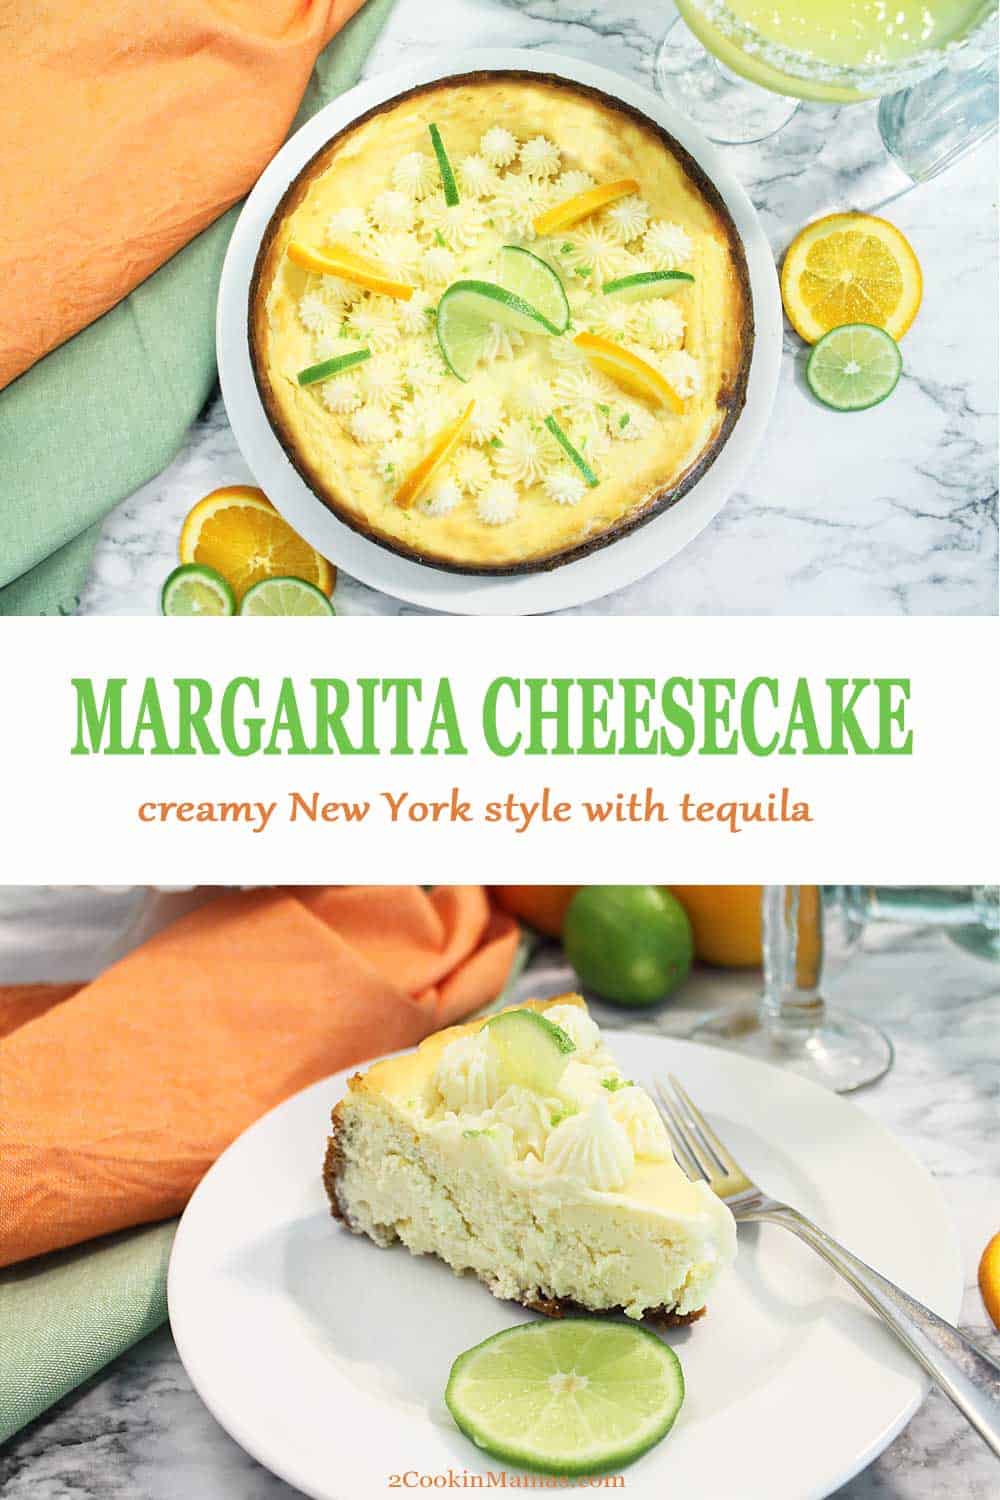 Margarita Cheesecake | 2 Cookin Mamas Creamy and rich Margarita Cheesecake has all the flavors of your favorite margarita. A New York style cheesecake made with the traditional cream cheese and sour cream then flavored with orange and lime zest and a few shots of tequila and Grand Marnier. The perfect dessert for the warm days of summer and a delicious addition to any Cinco de Mayo celebration. #cheesecake #margarita #NewYork #recipe #dessert #homemade